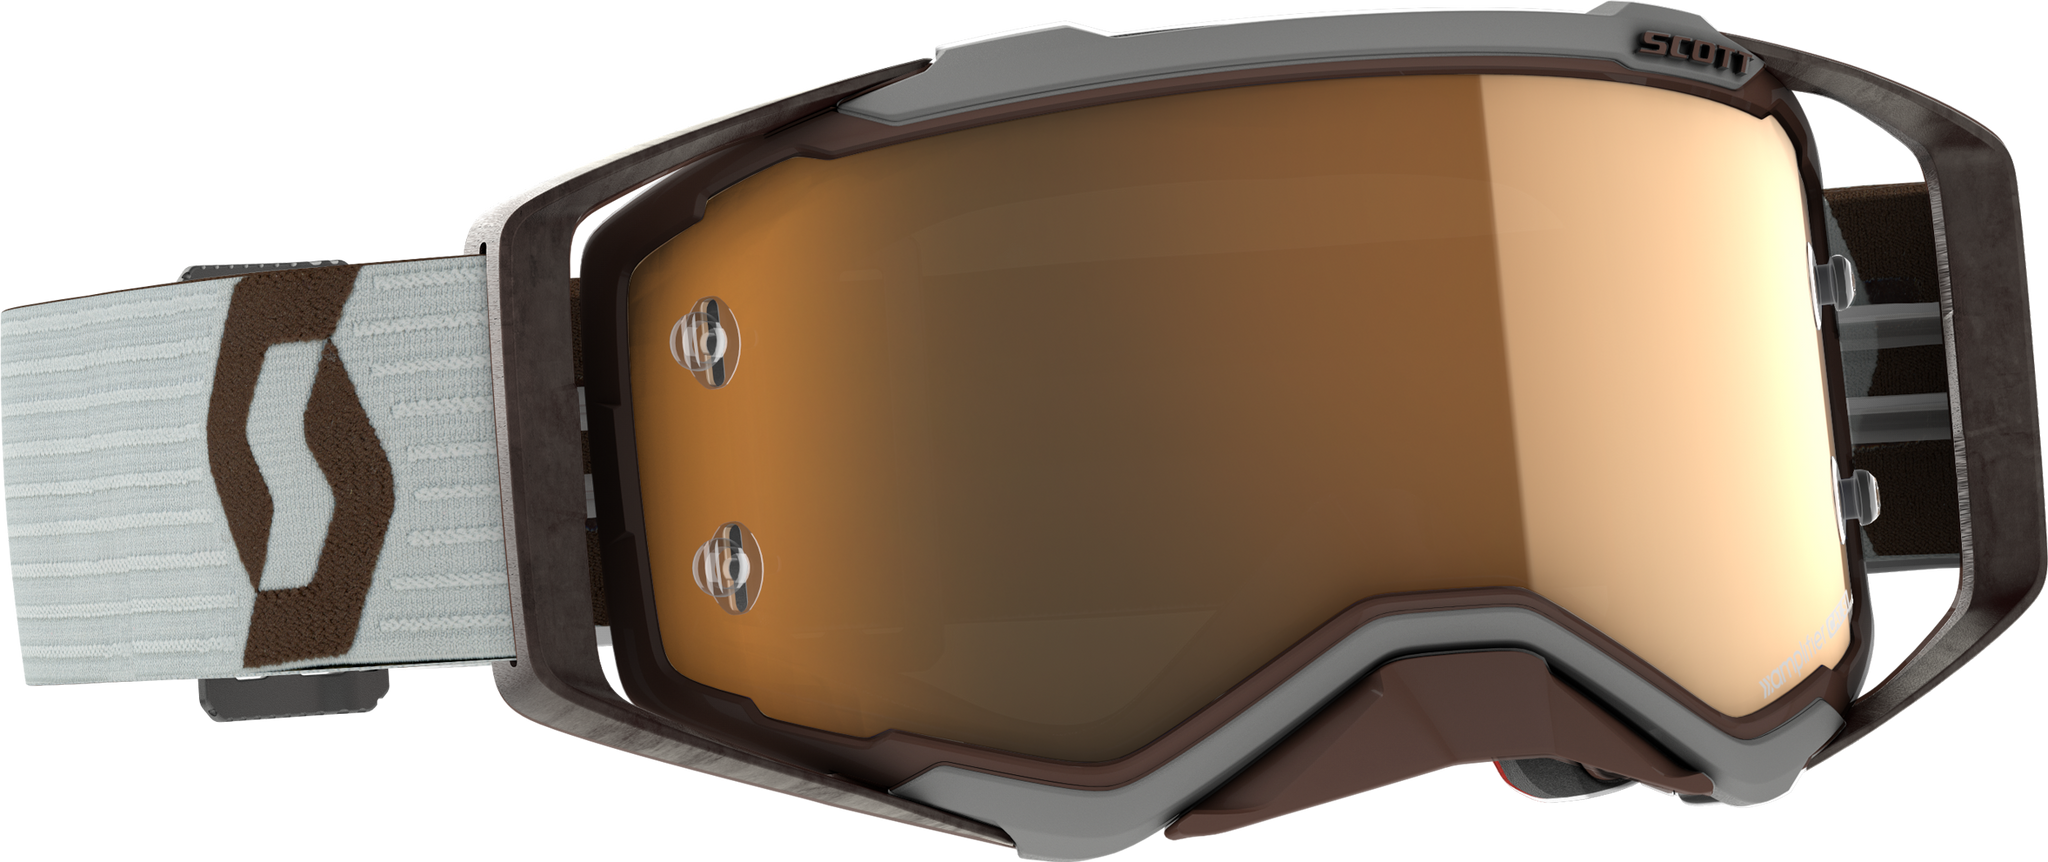 Prospect Amplifier Goggle Grey/Brown Gold Chrome Works